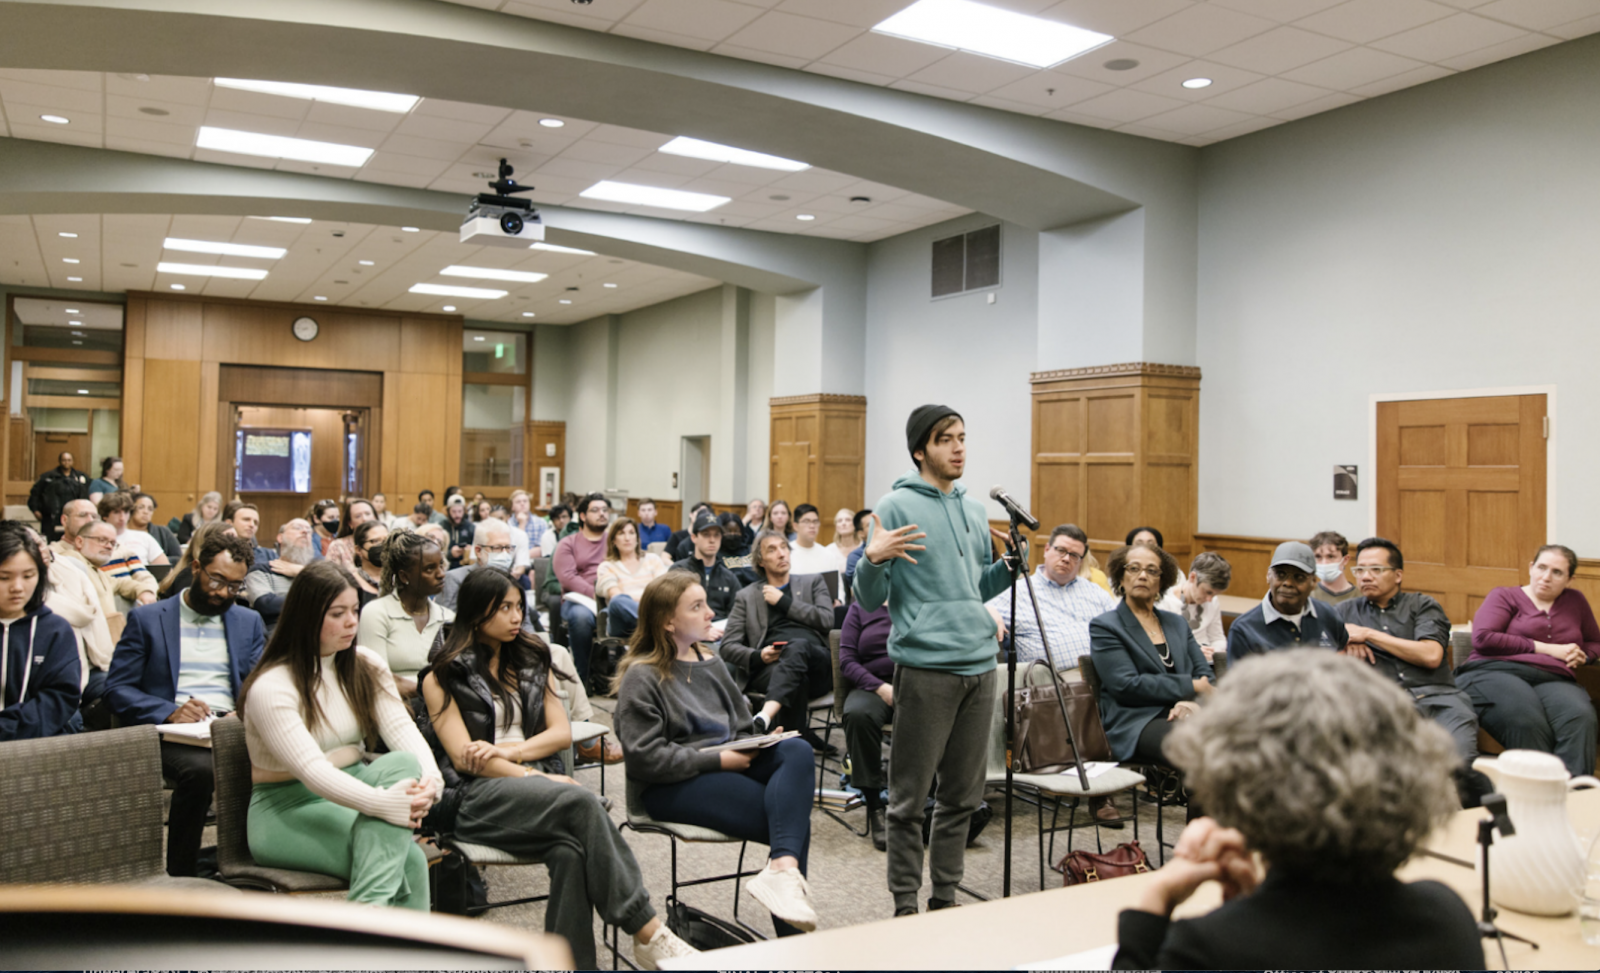 The "Confronting Hate: Antisemitism and Racism" discussion was attended by more than 60 students, faculty, staff and community members. (Vanderbilt University)